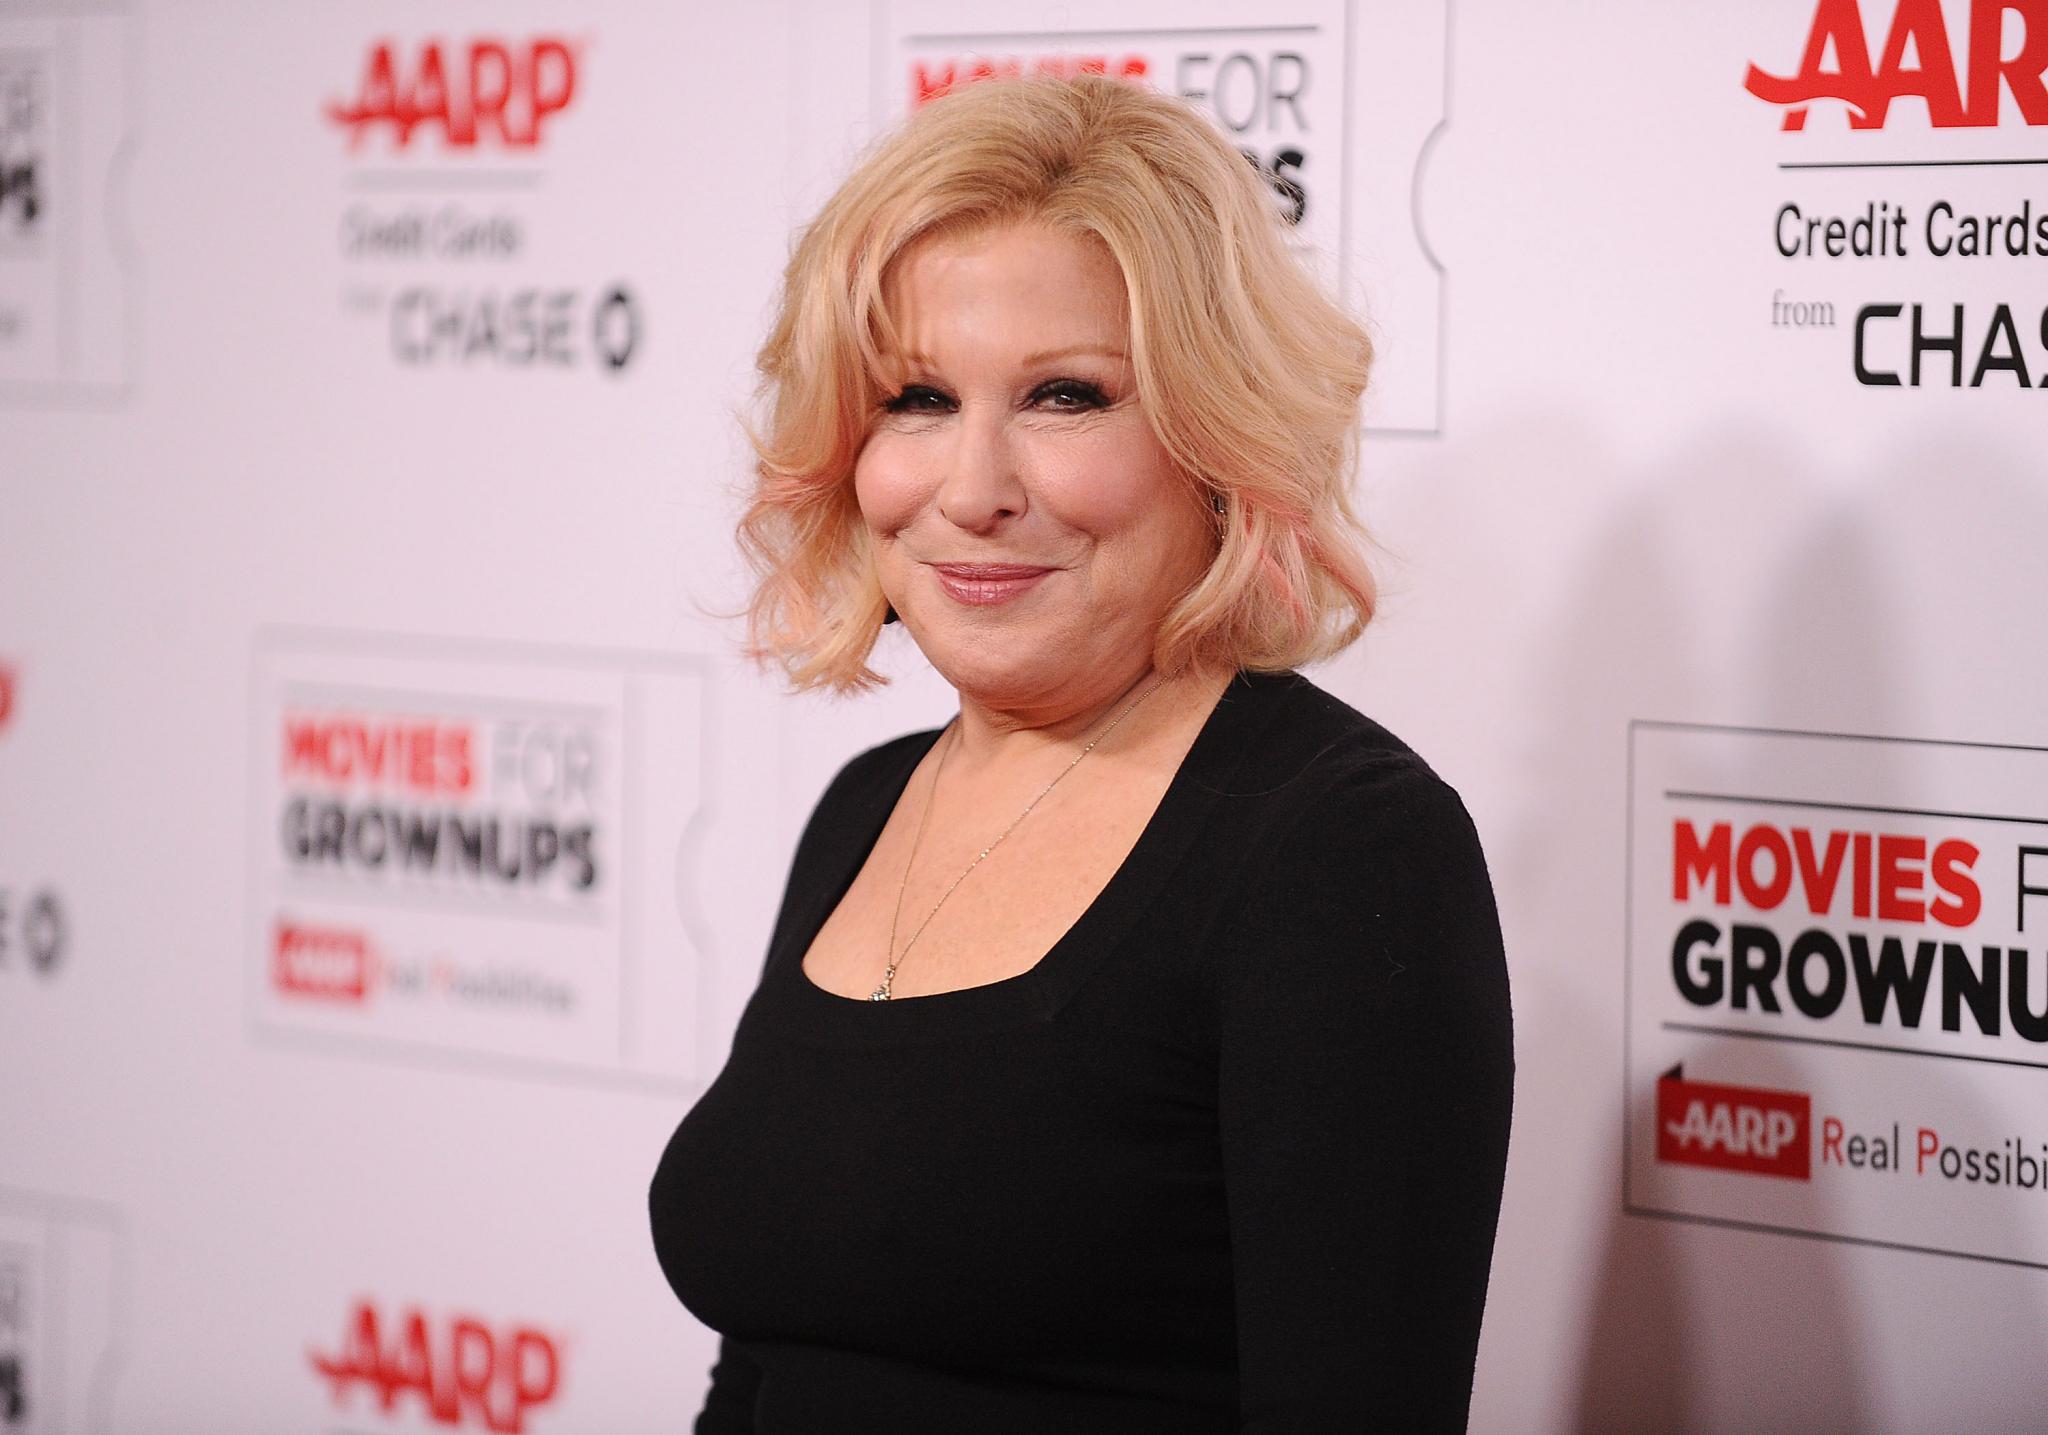 In Case You Didn't Know It, Bette Midler Is for the People!